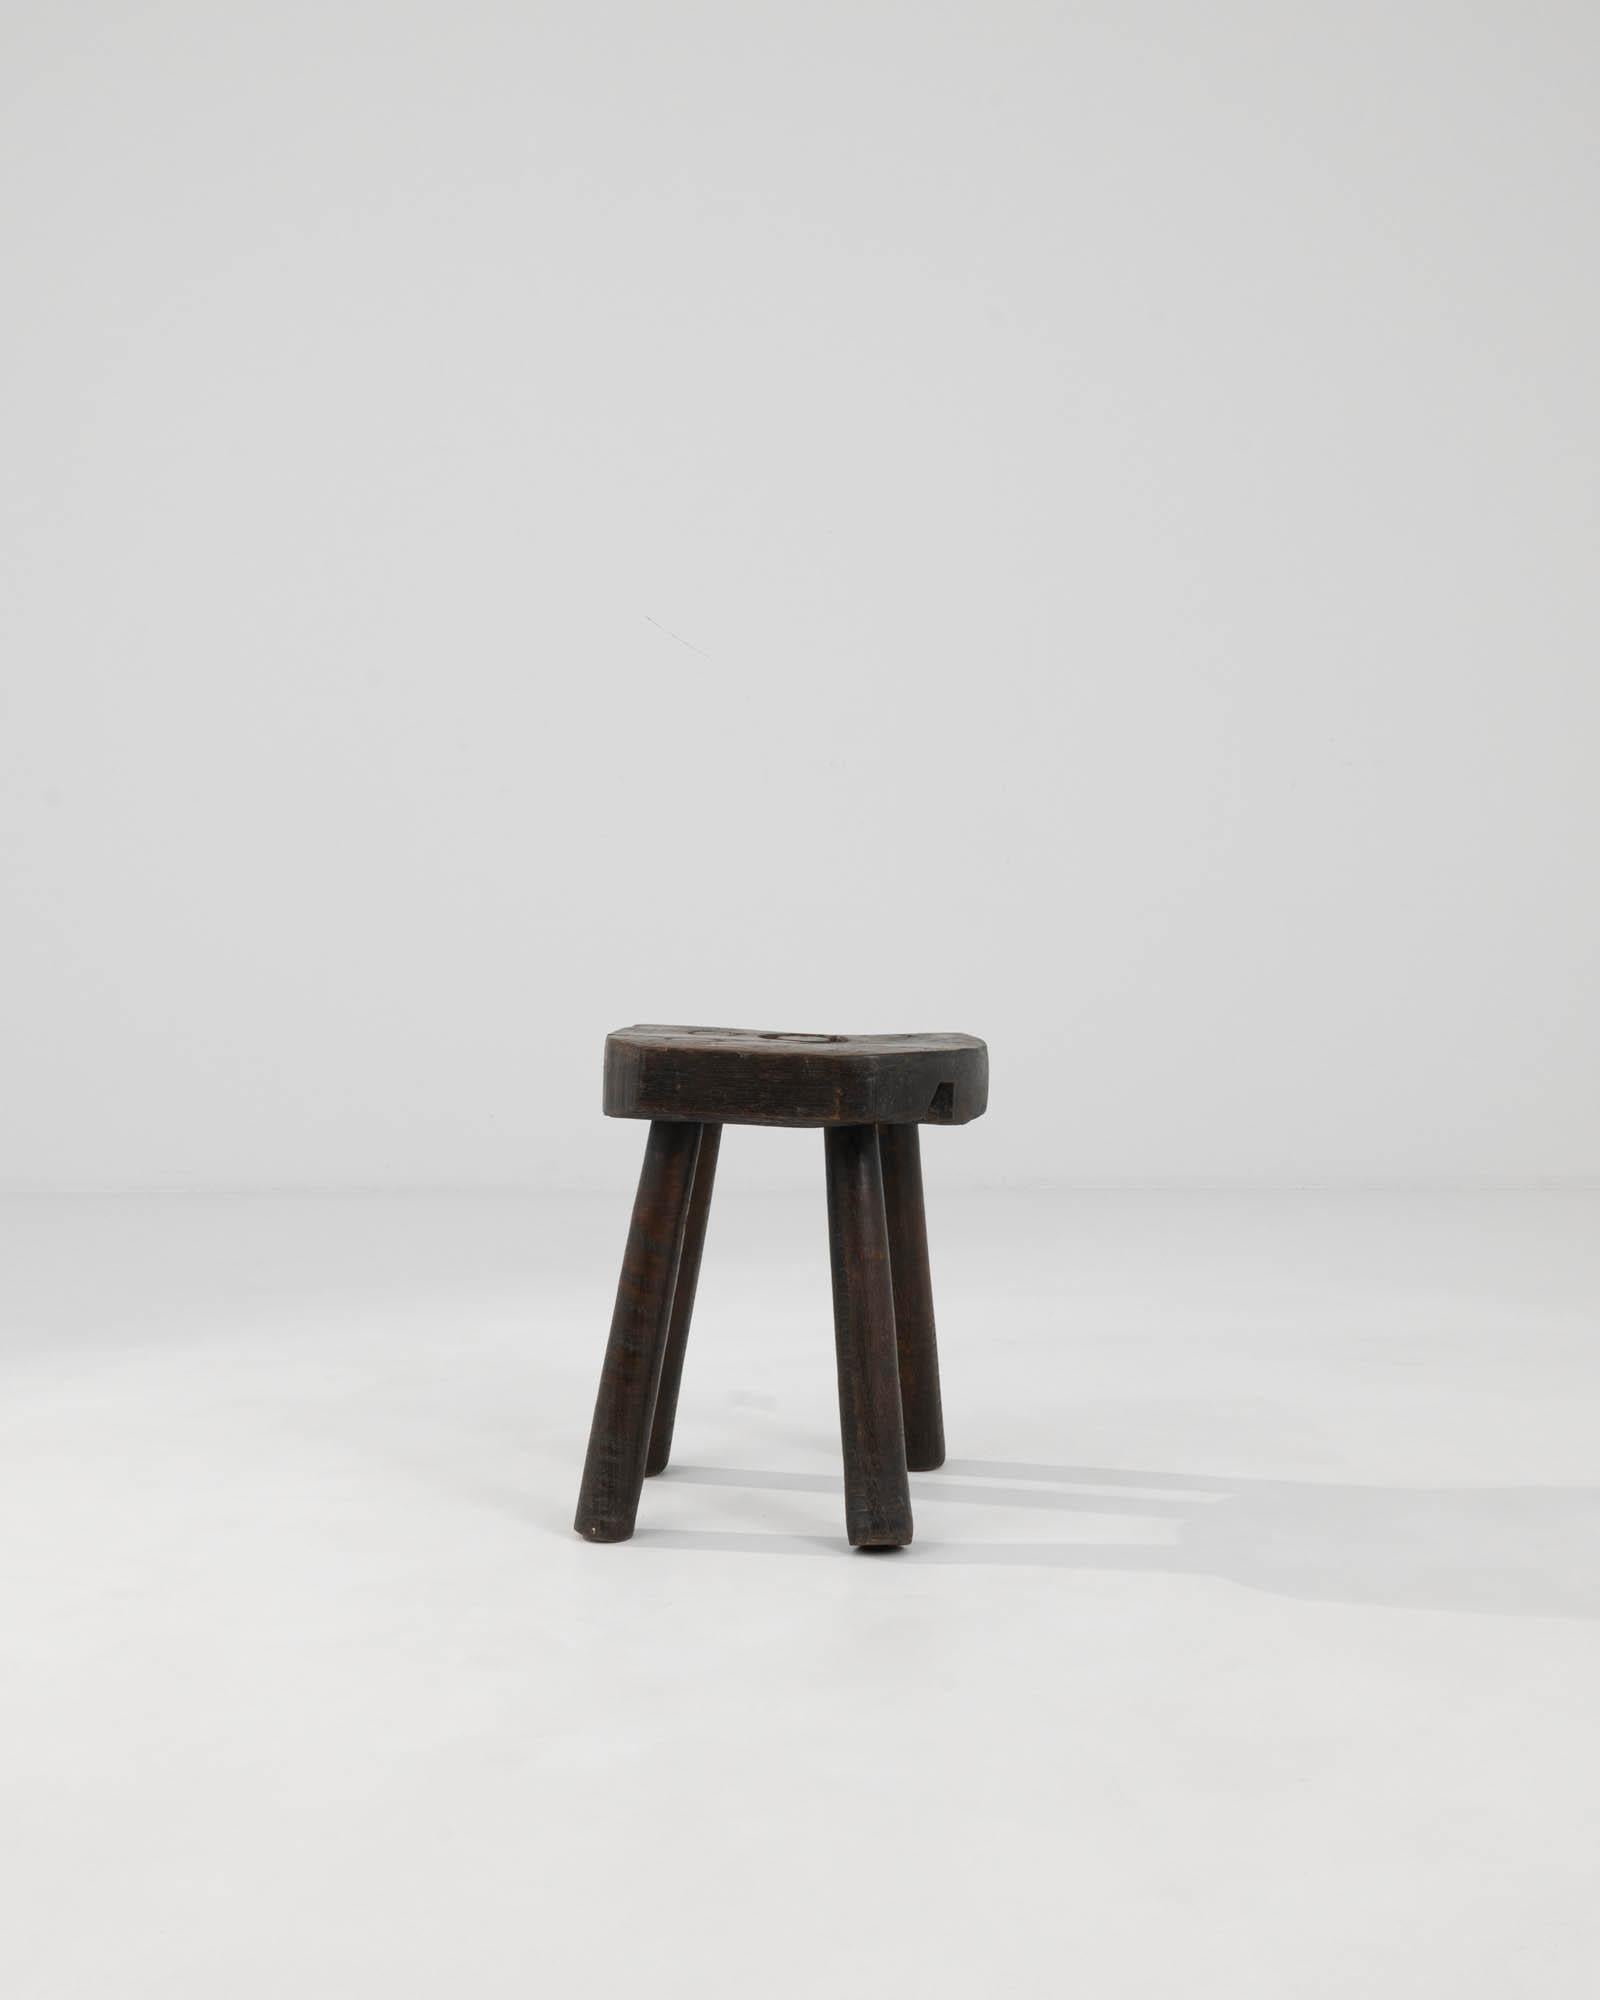 Discover the charm of rustic French décor with this Early 20th Century French Wooden Stool, a genuine artifact that radiates a rich sense of history. This robust piece is beautifully crafted from solid wood, featuring a dark patina that tells a